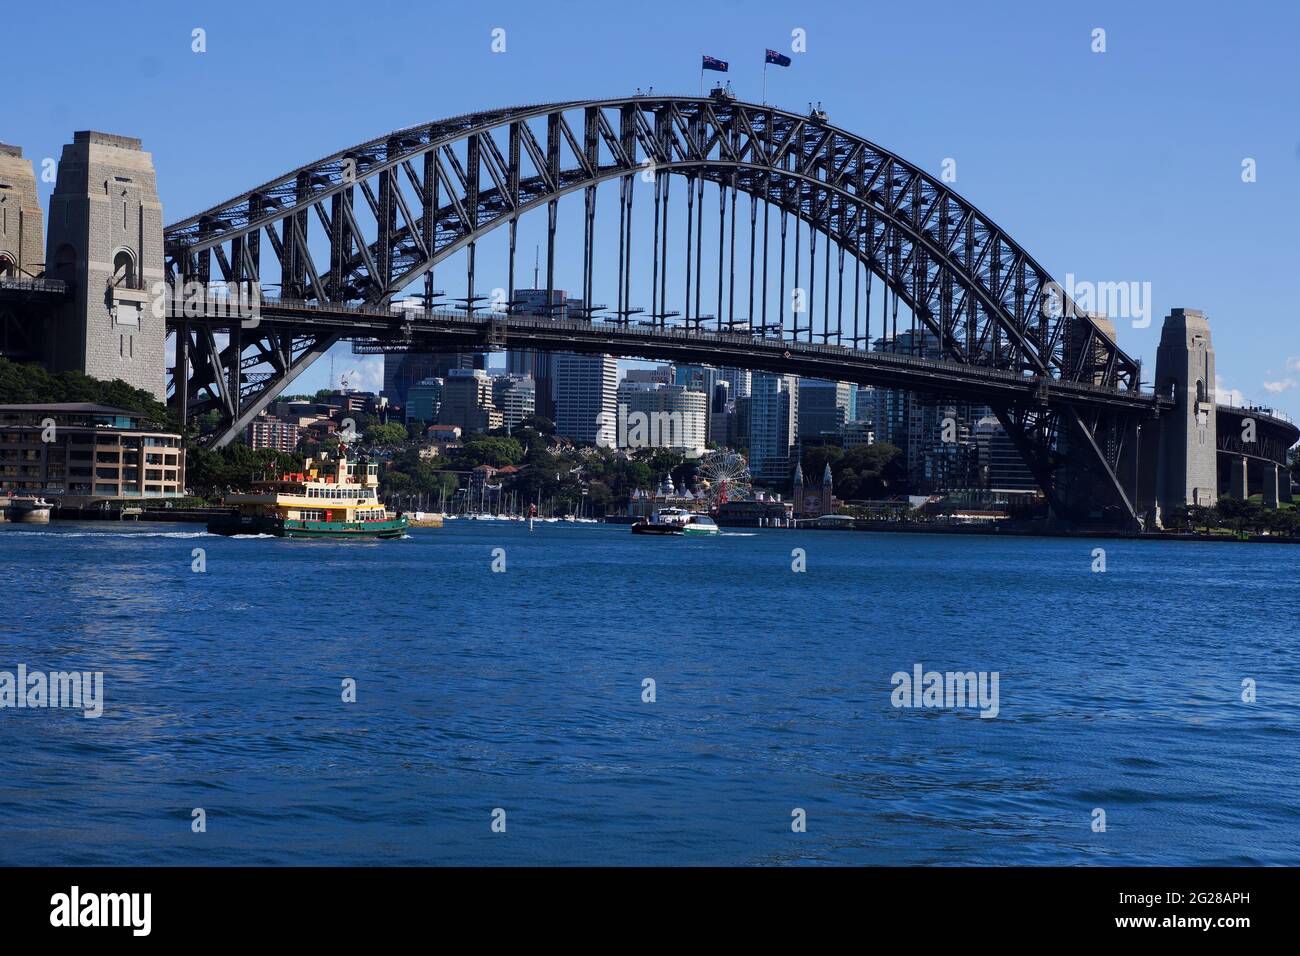 Iconic Sydney harbour bridge with a ferry passing underneath against a blue sky with blue water and copy space. Stock Photo